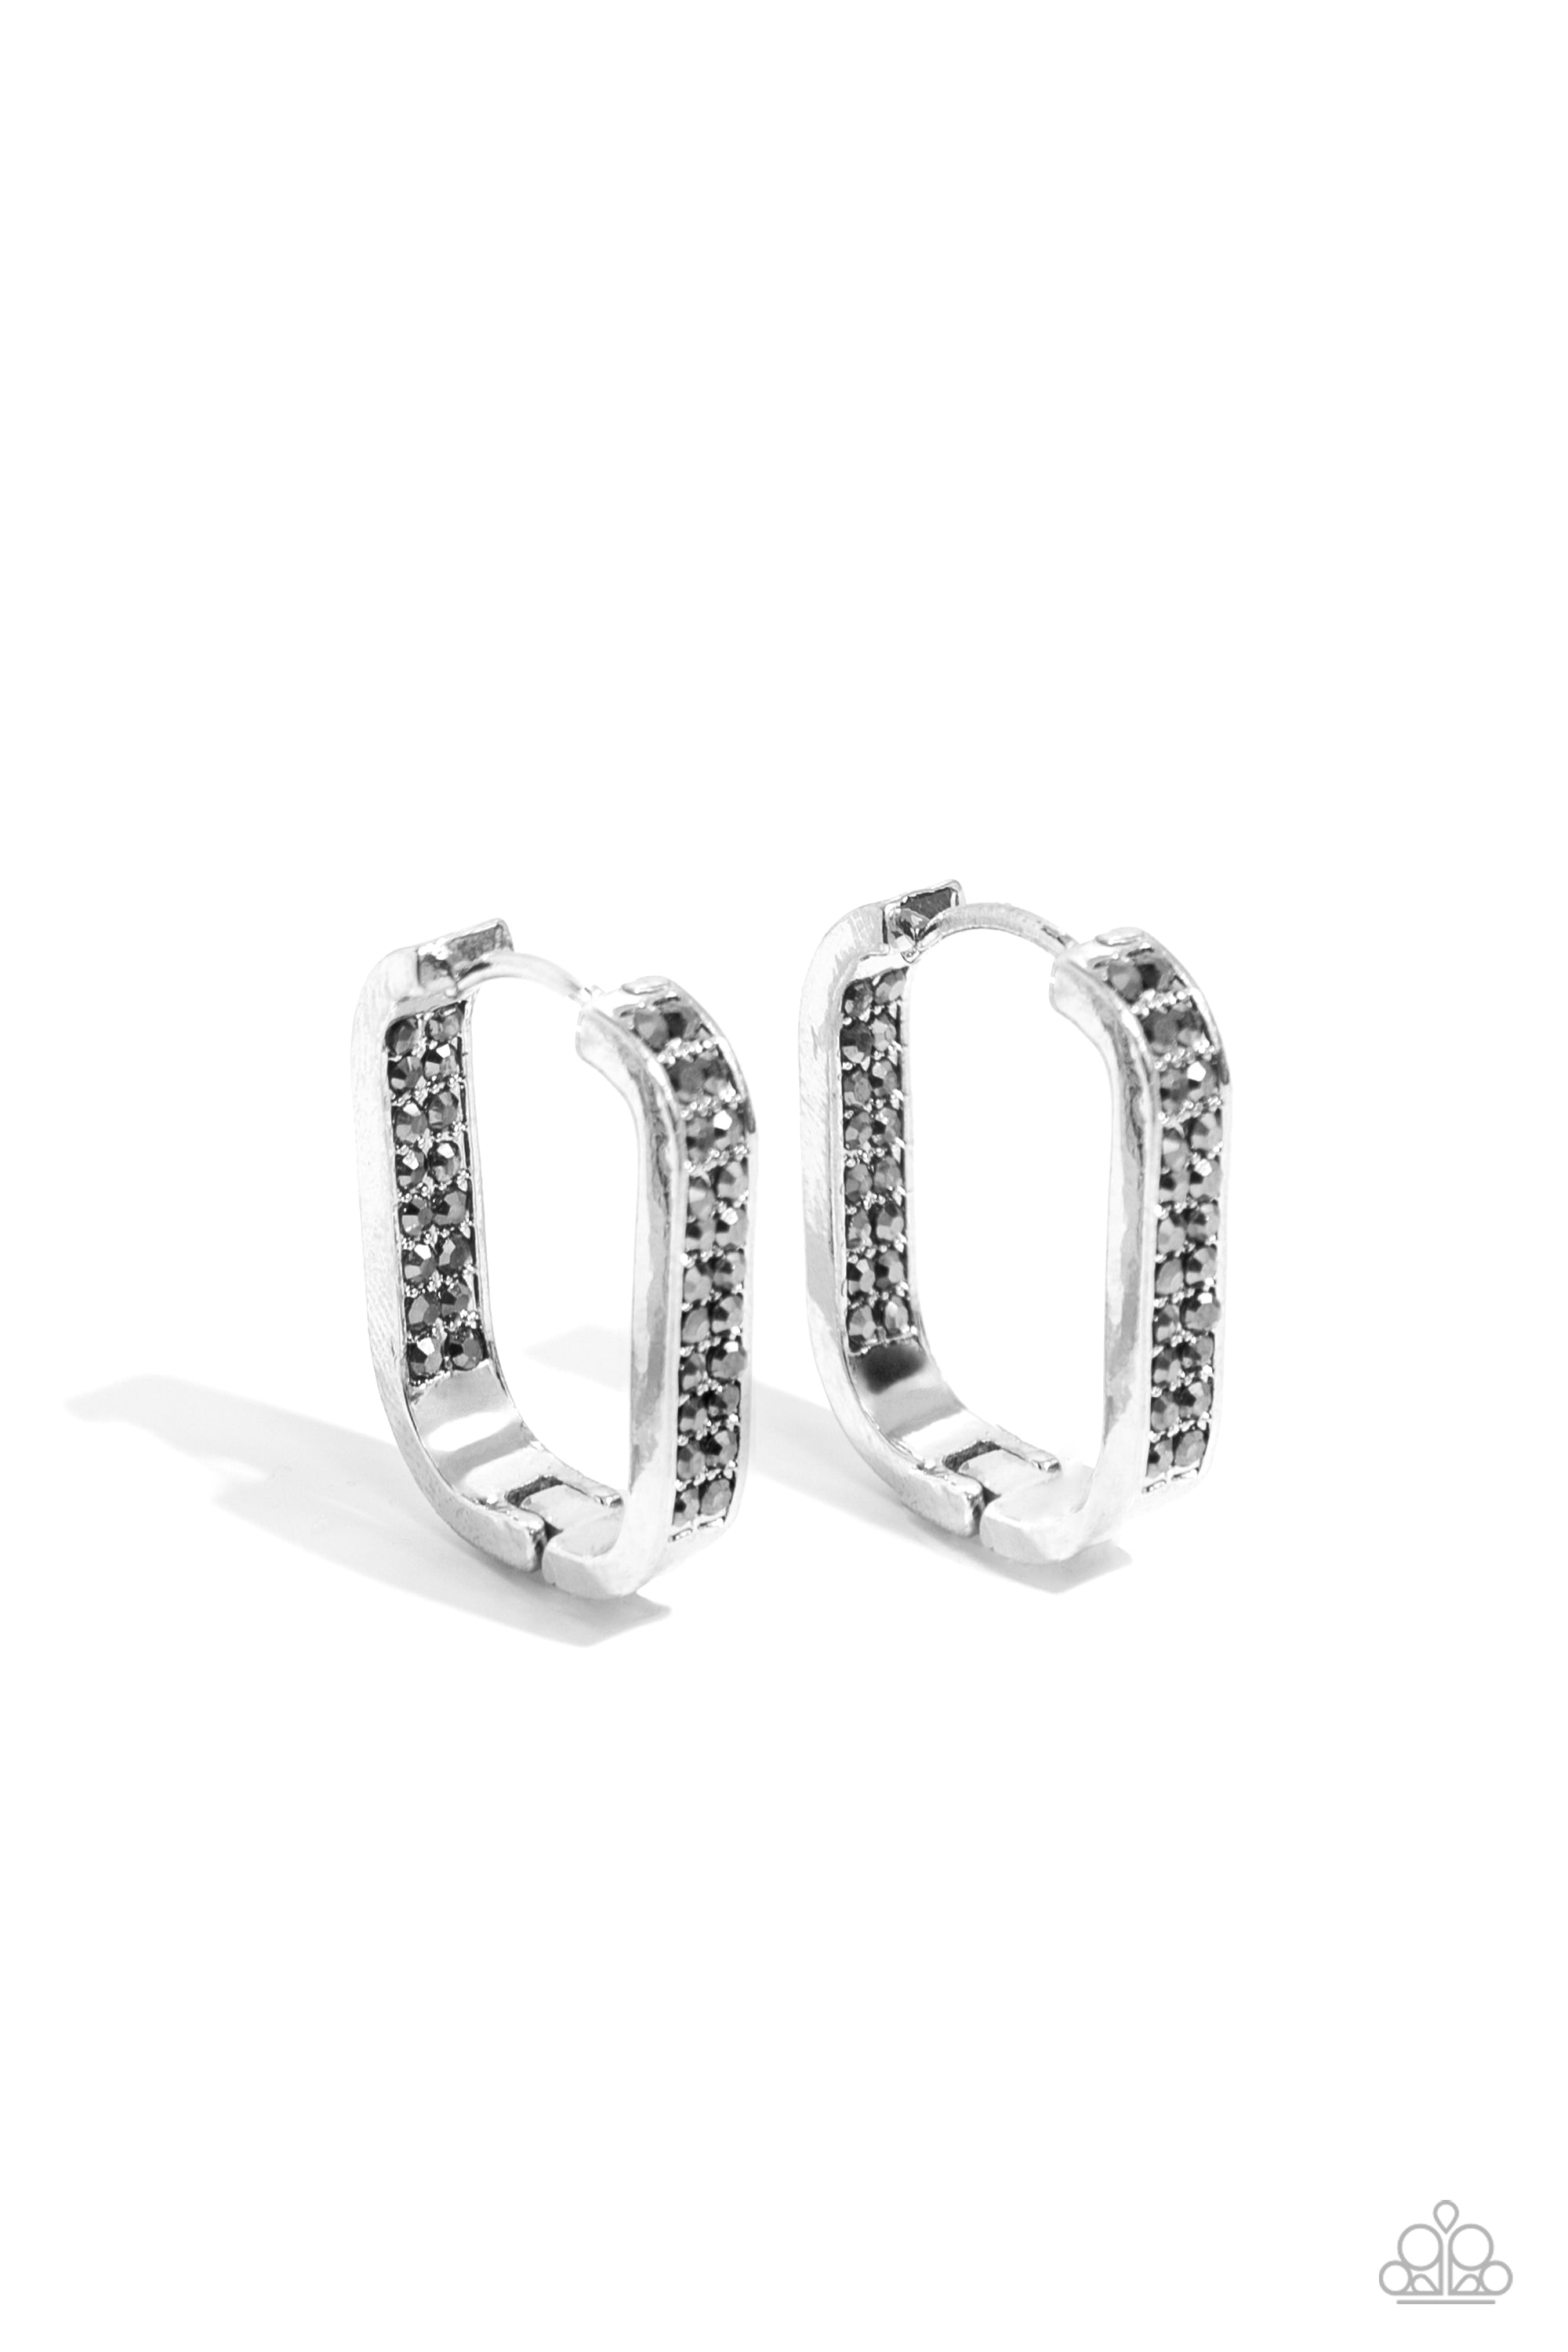 SINUOUS-SILHOUETTES-SILVER-EARRINGS